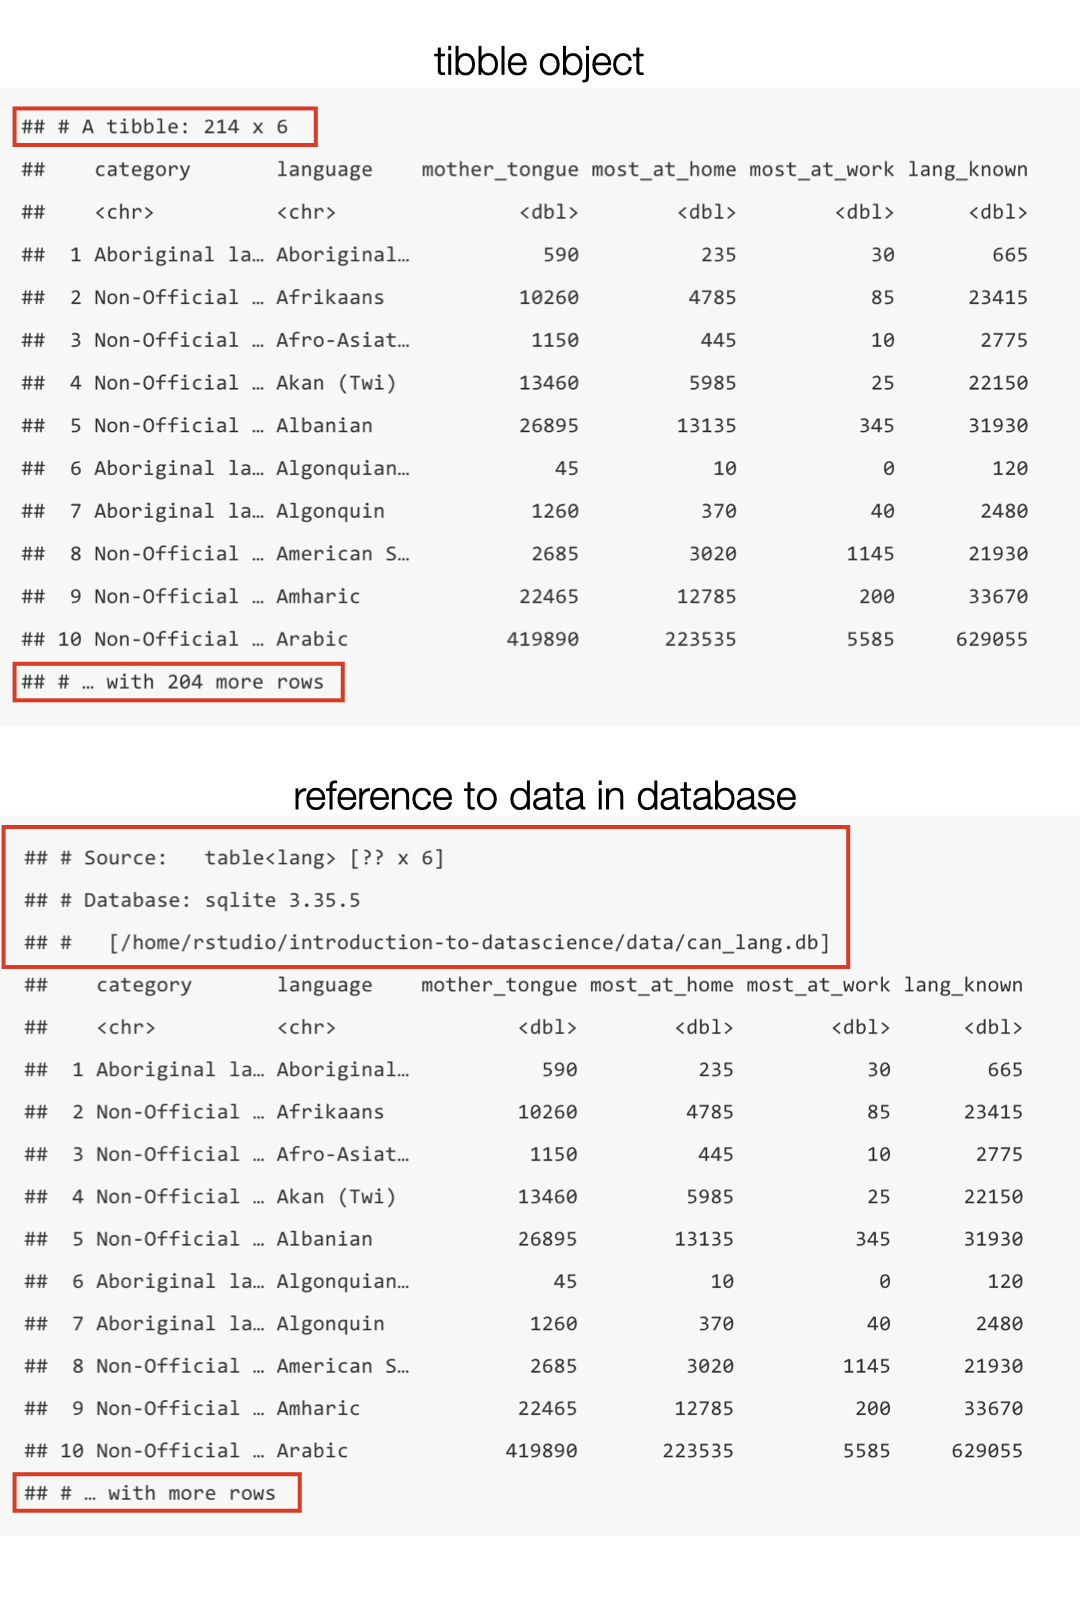 Comparison of a reference to data in a database and a tibble in R.